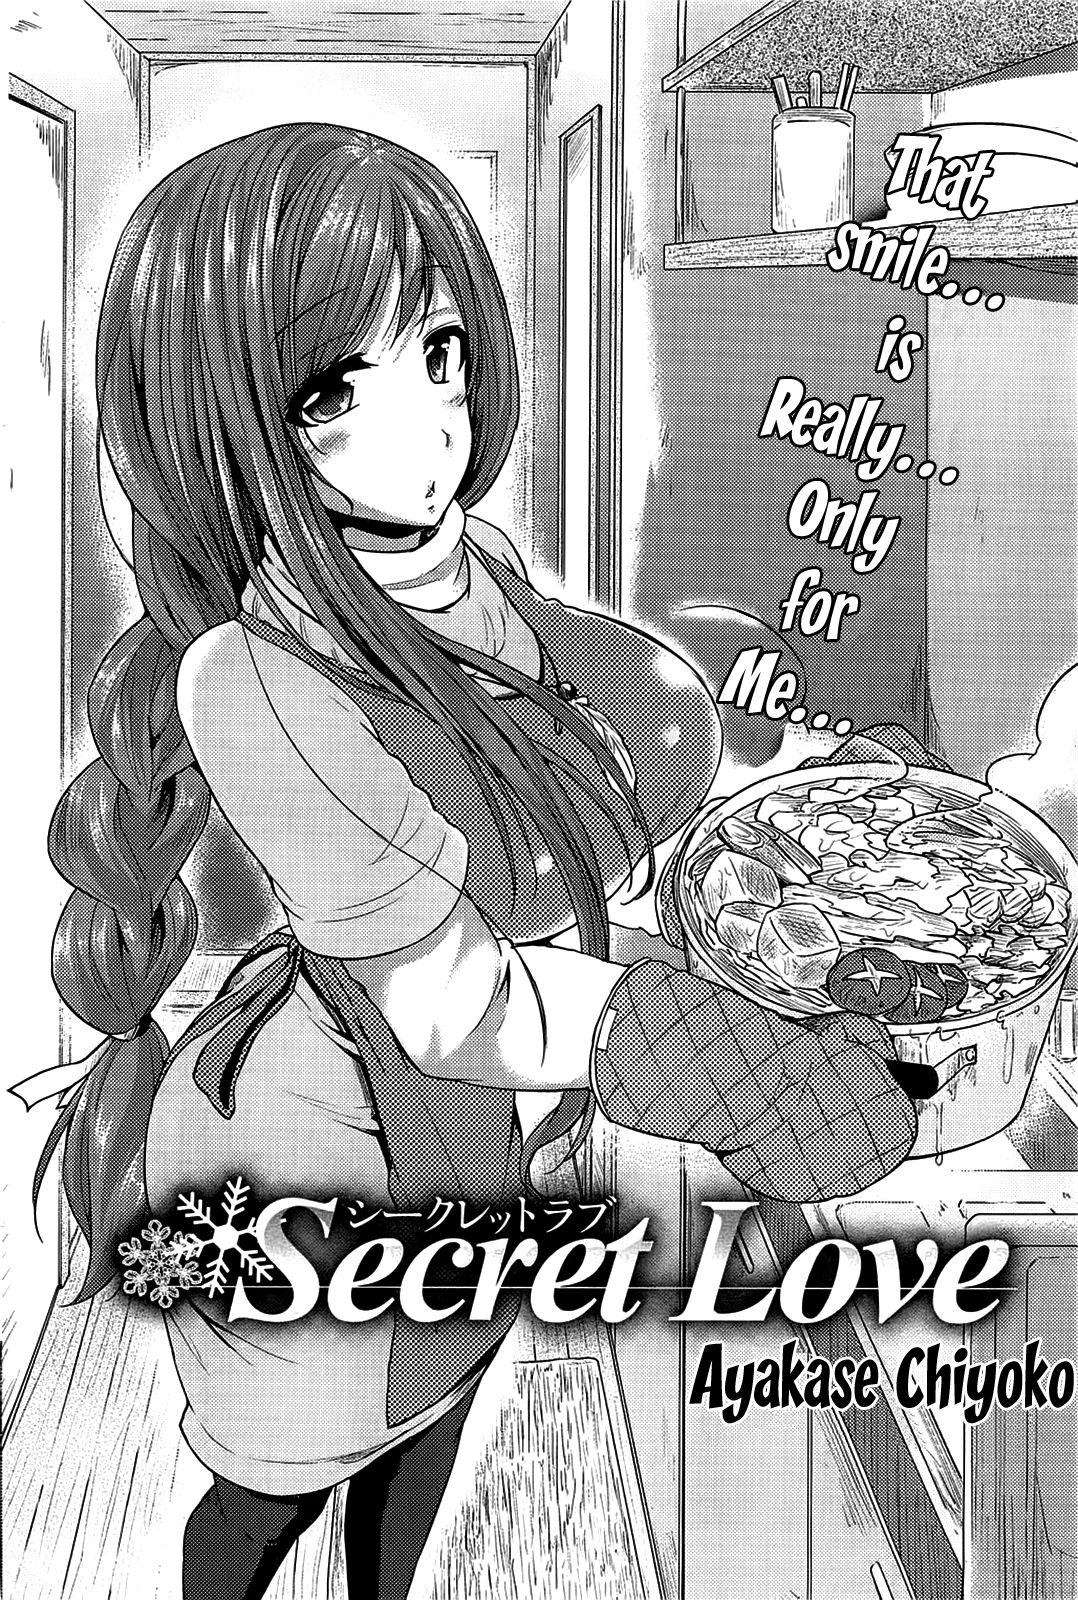 [Ayakase Chiyoko] Secret Love Ch.1 + Extra Ch.2+ 3 (Comic Hot Milk)[ENG][The Lusty Lady Project] 